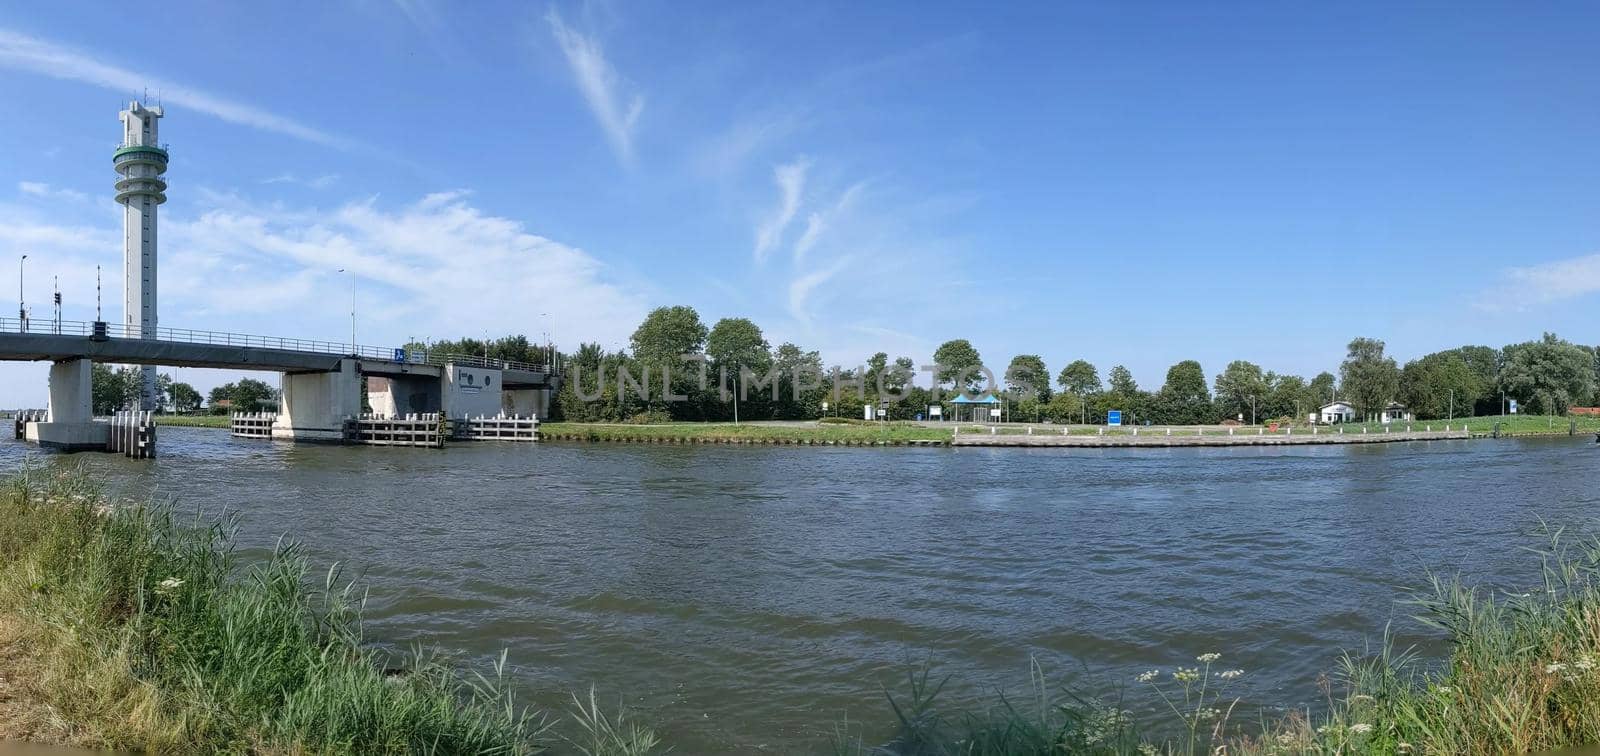 Panorama from a Princess margriet canal in Spannenburg, Friesland The Netherlands